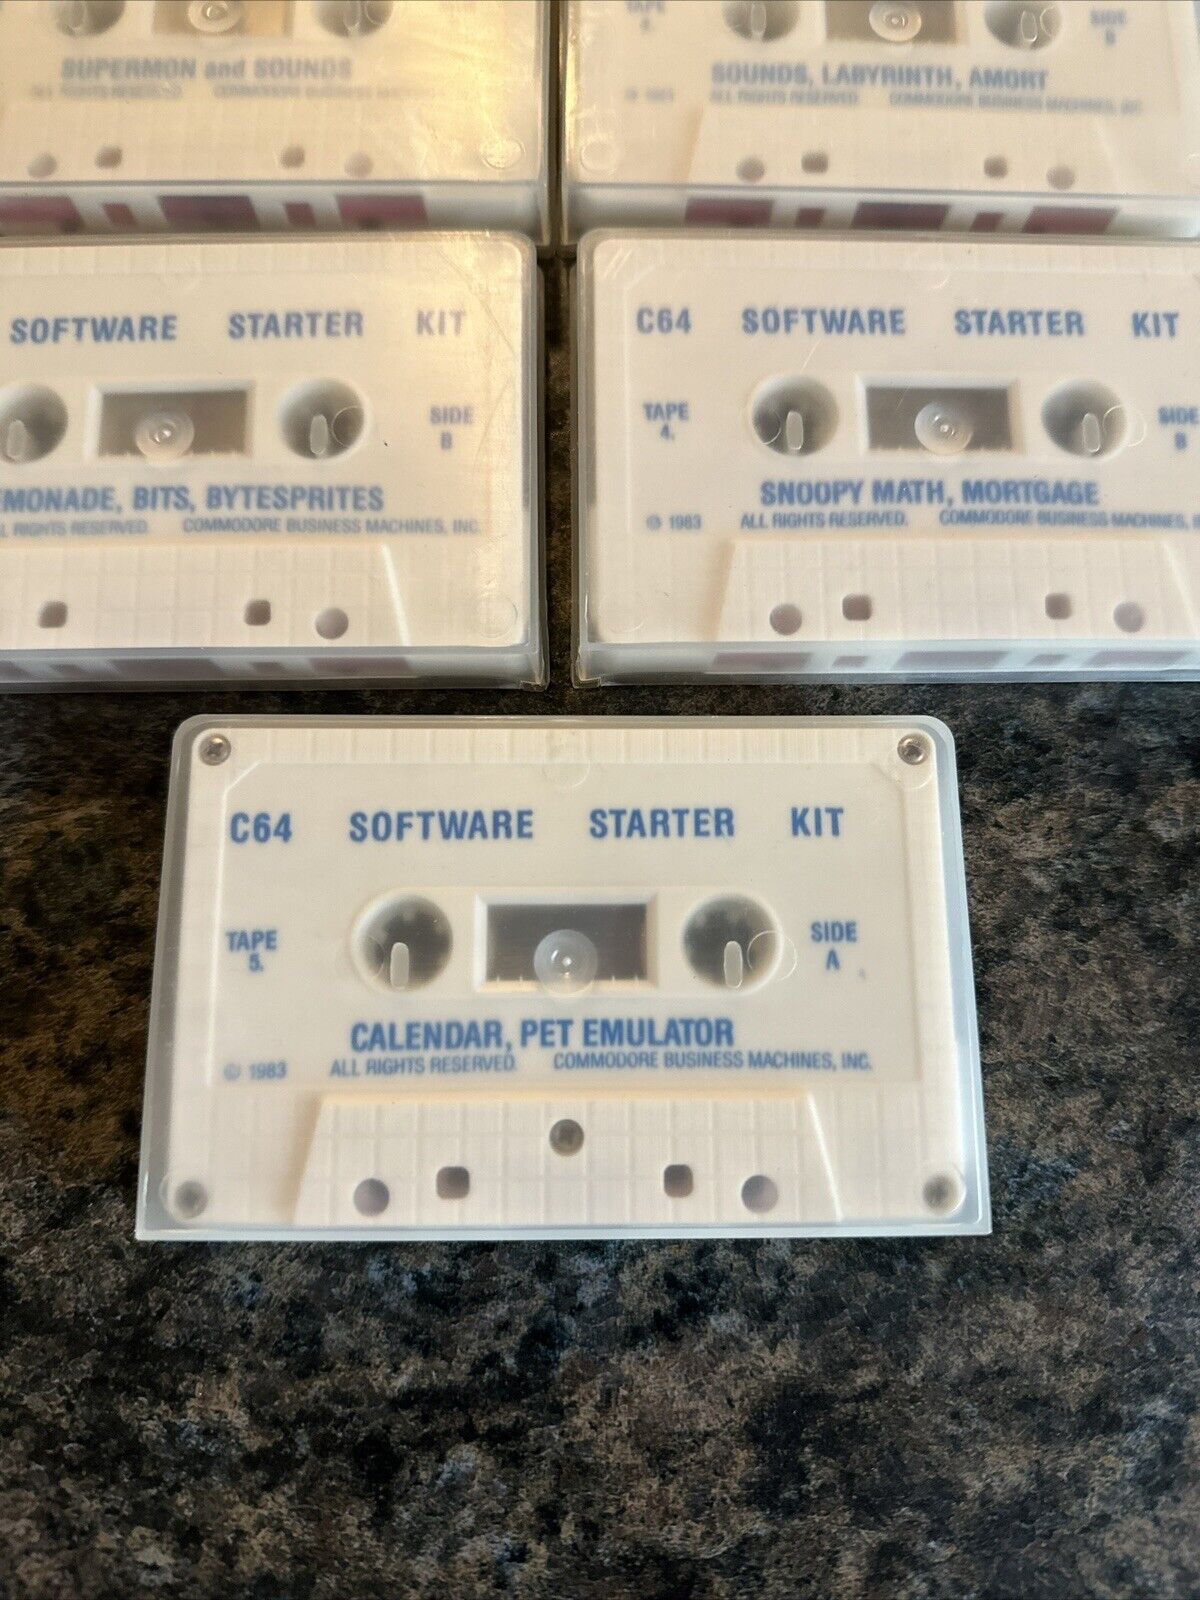 5-Commodore 64 Vintage Software Starter Kit Cassettes With Case VG Condition.